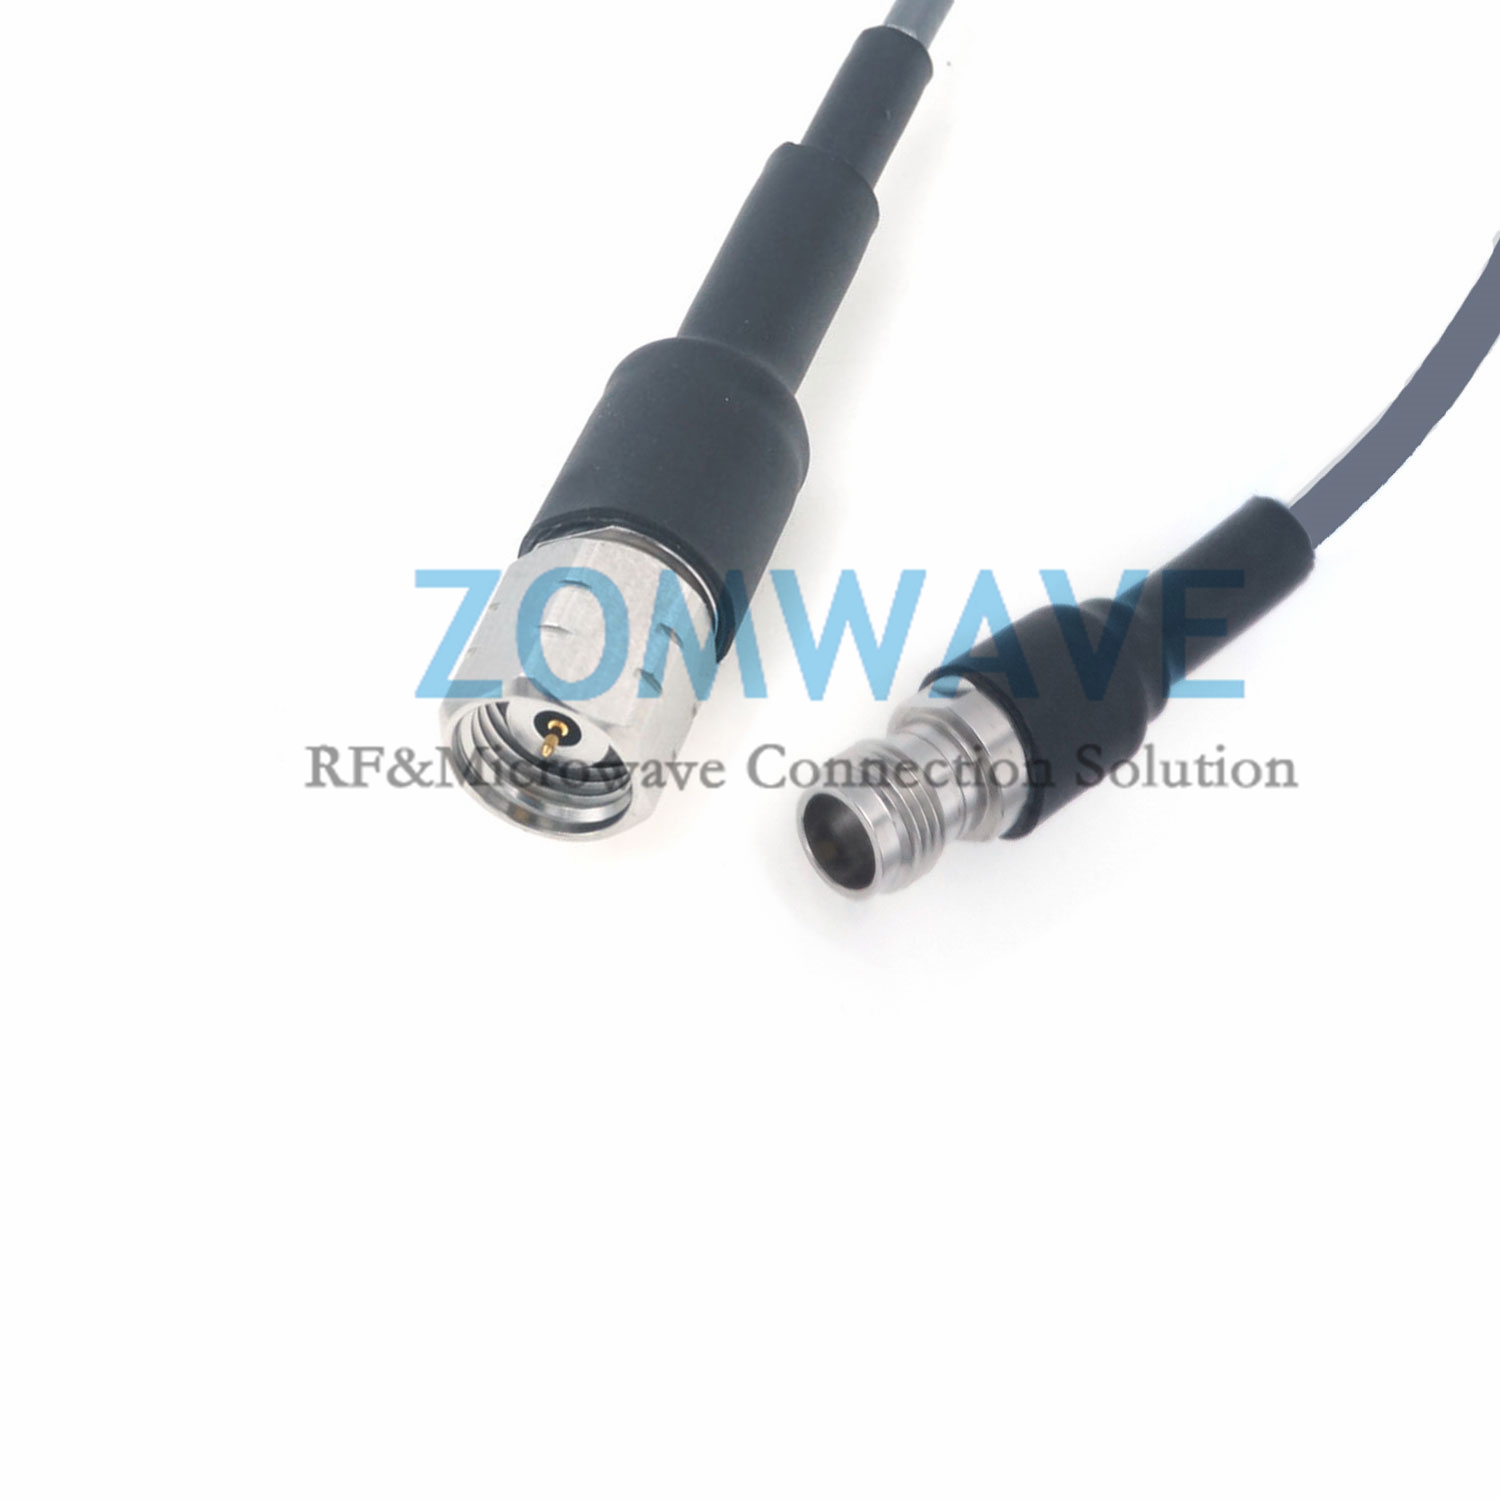 1.85mm Male to 2.4mm Female, Flexible ZCXN 3506 Cable, 50GHz